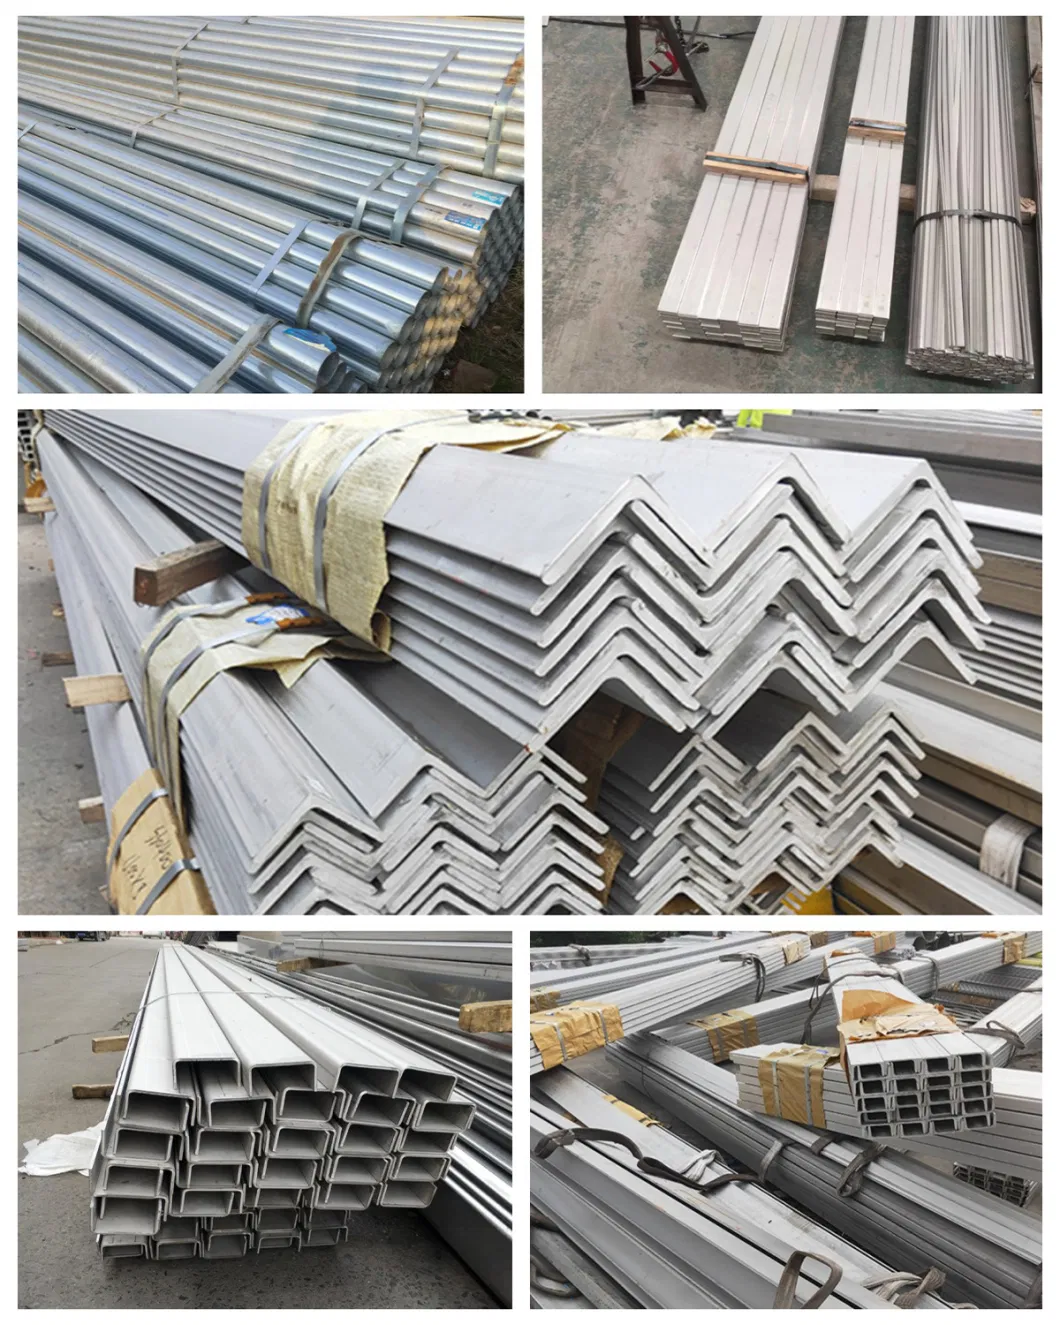 ASTM Q235B Q345b Q420c Q460c Ss400 Ss540 S235 S275 S355 Polishing, Annealing, Pickling, Bright Angle Steel Steel Angle Profile in Stock